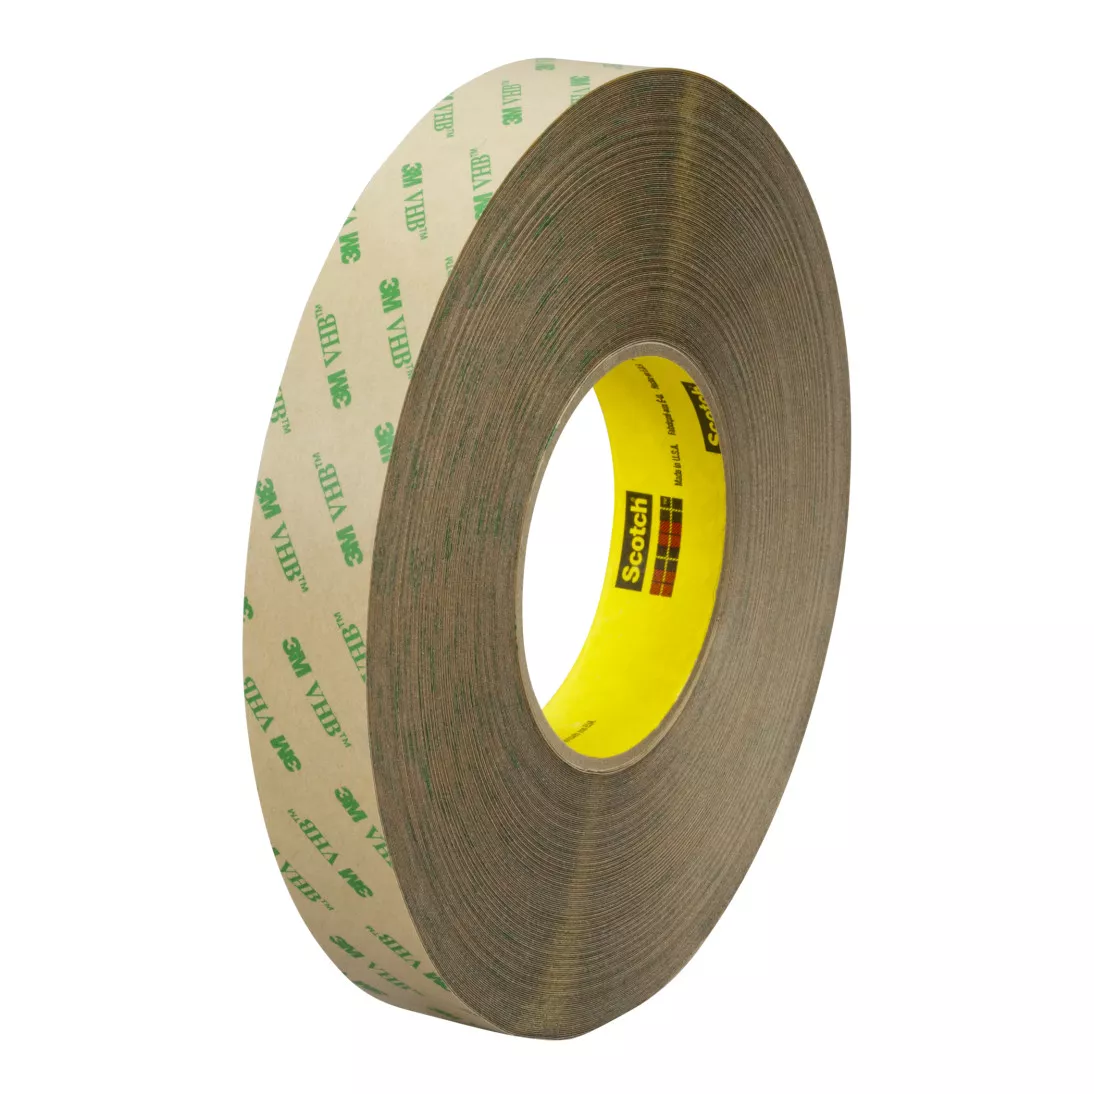 3M™ Adhesive Transfer Tape 9473PC, Clear, 3/8 in x 60 yd, 10 mil, 24
rolls per case